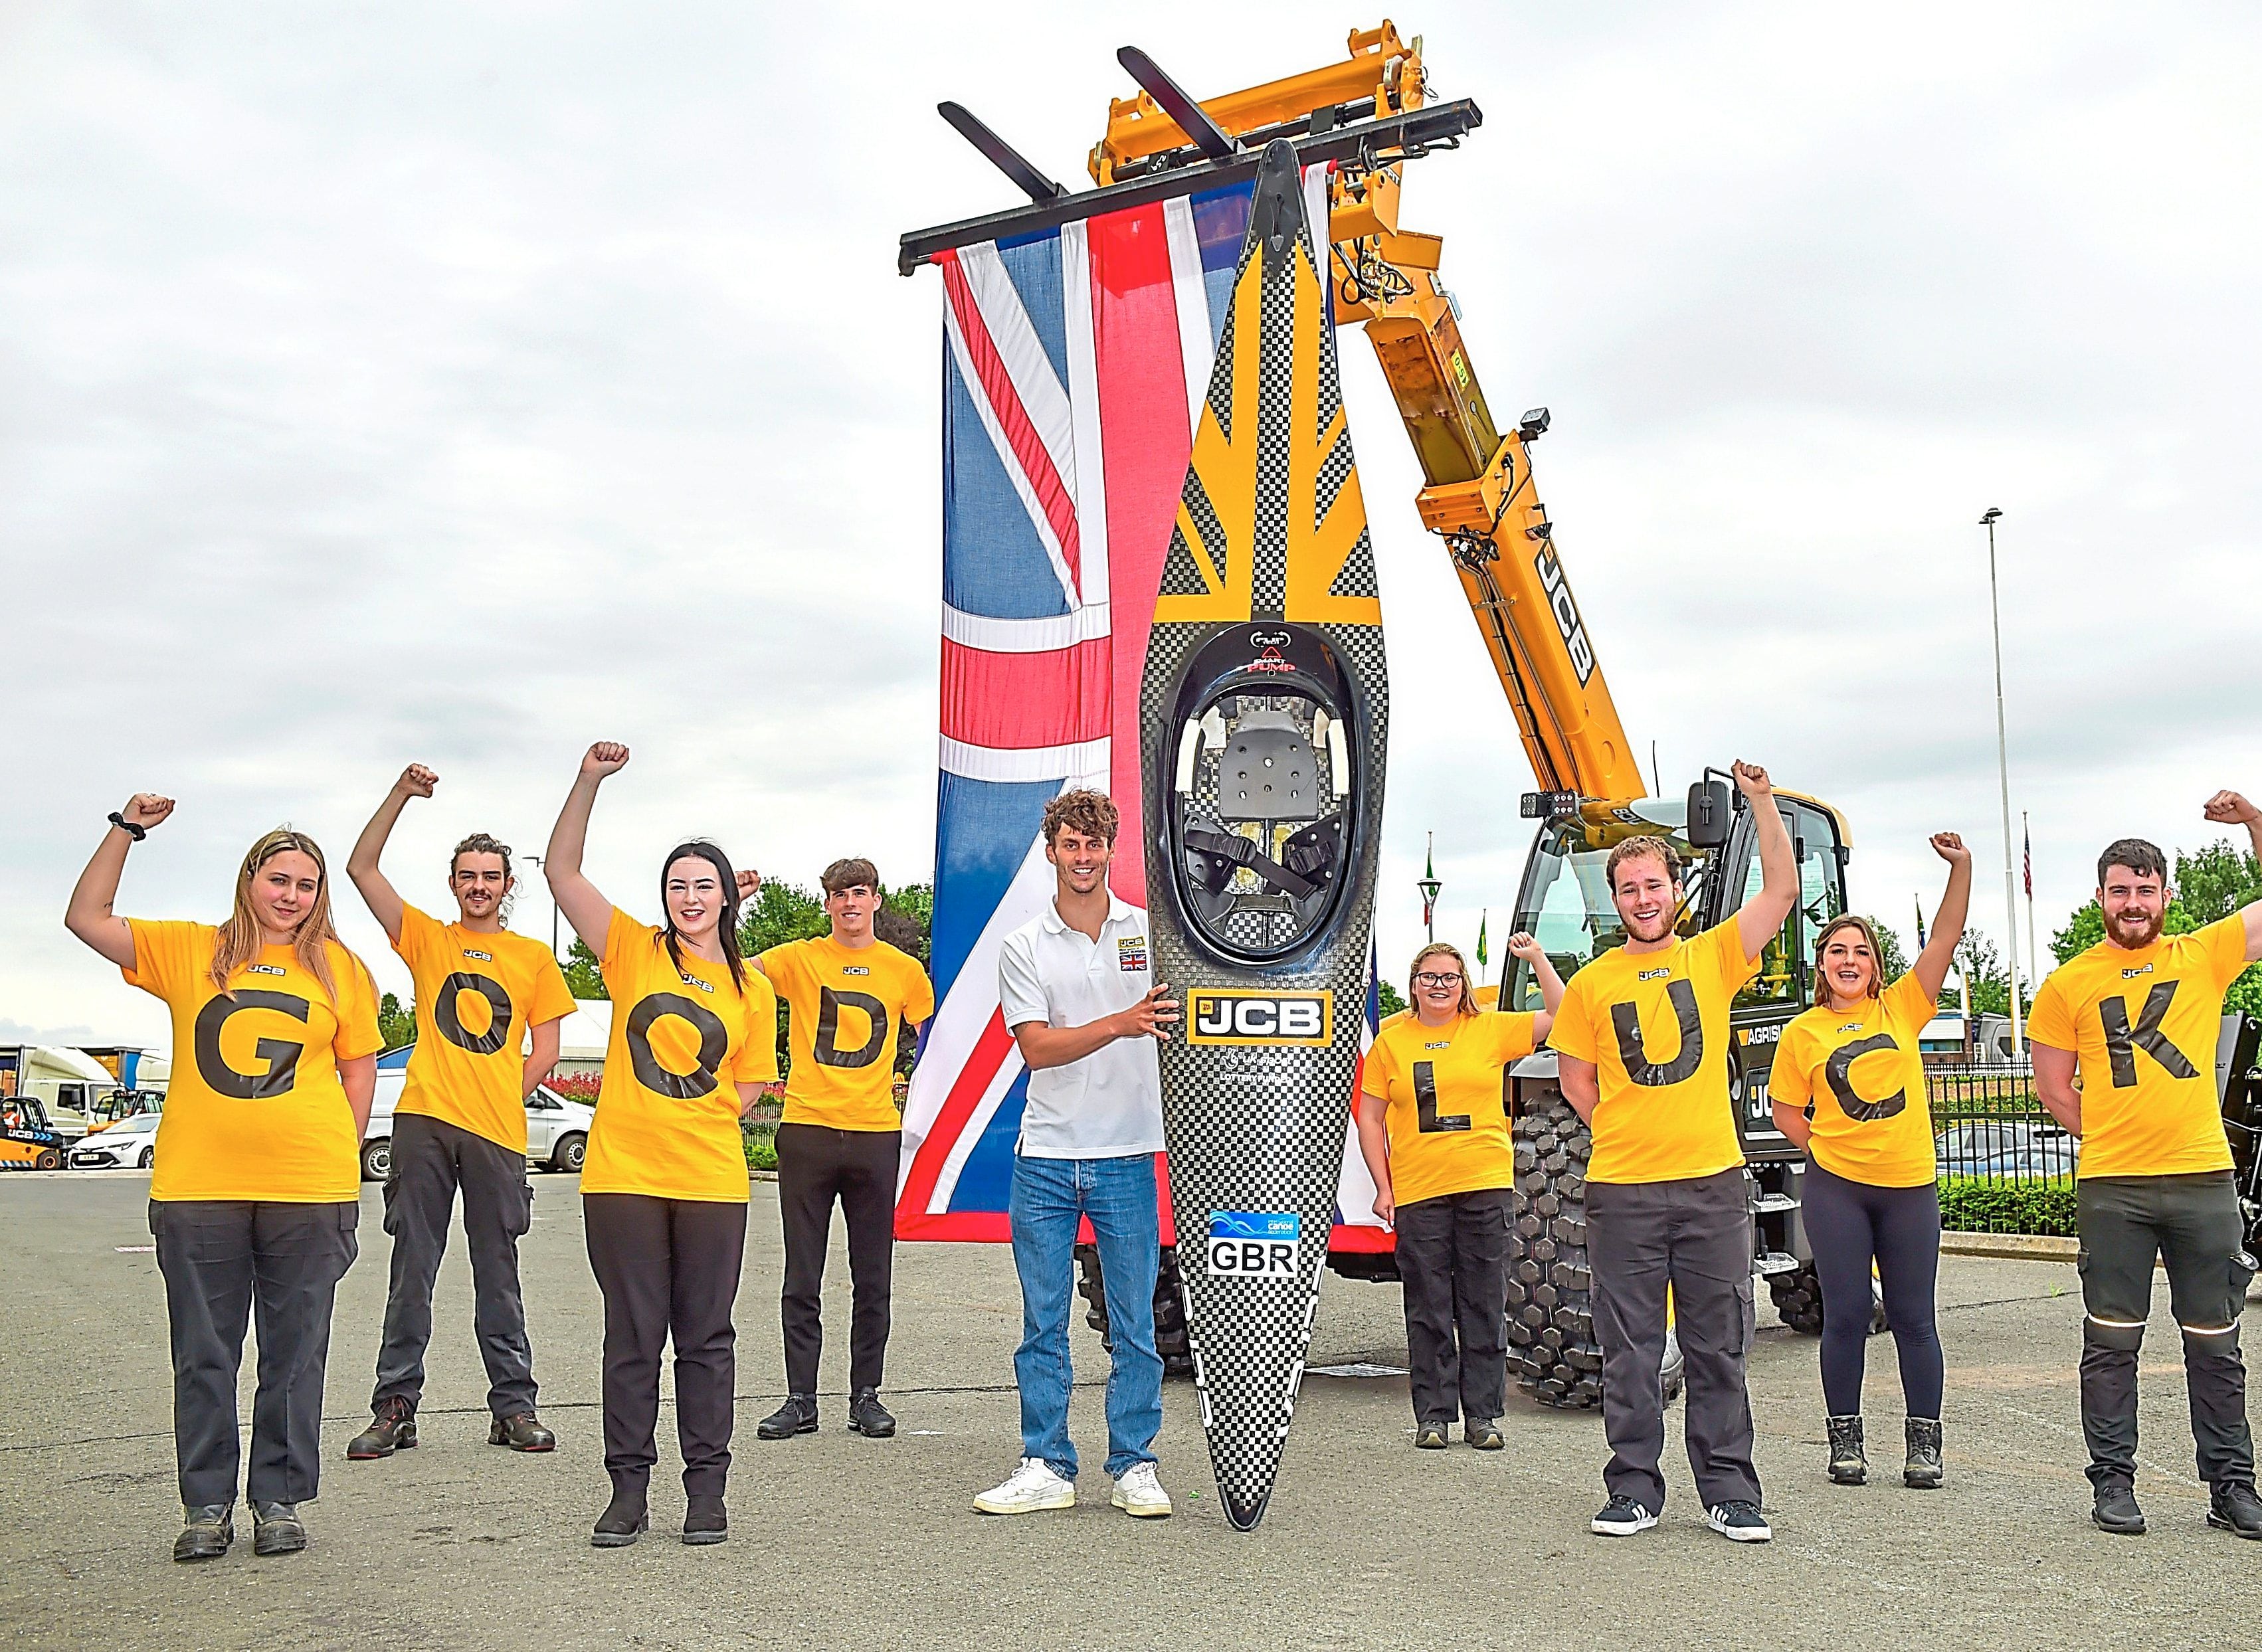 Staff dig in to give Adam Burgess Olympics send-off